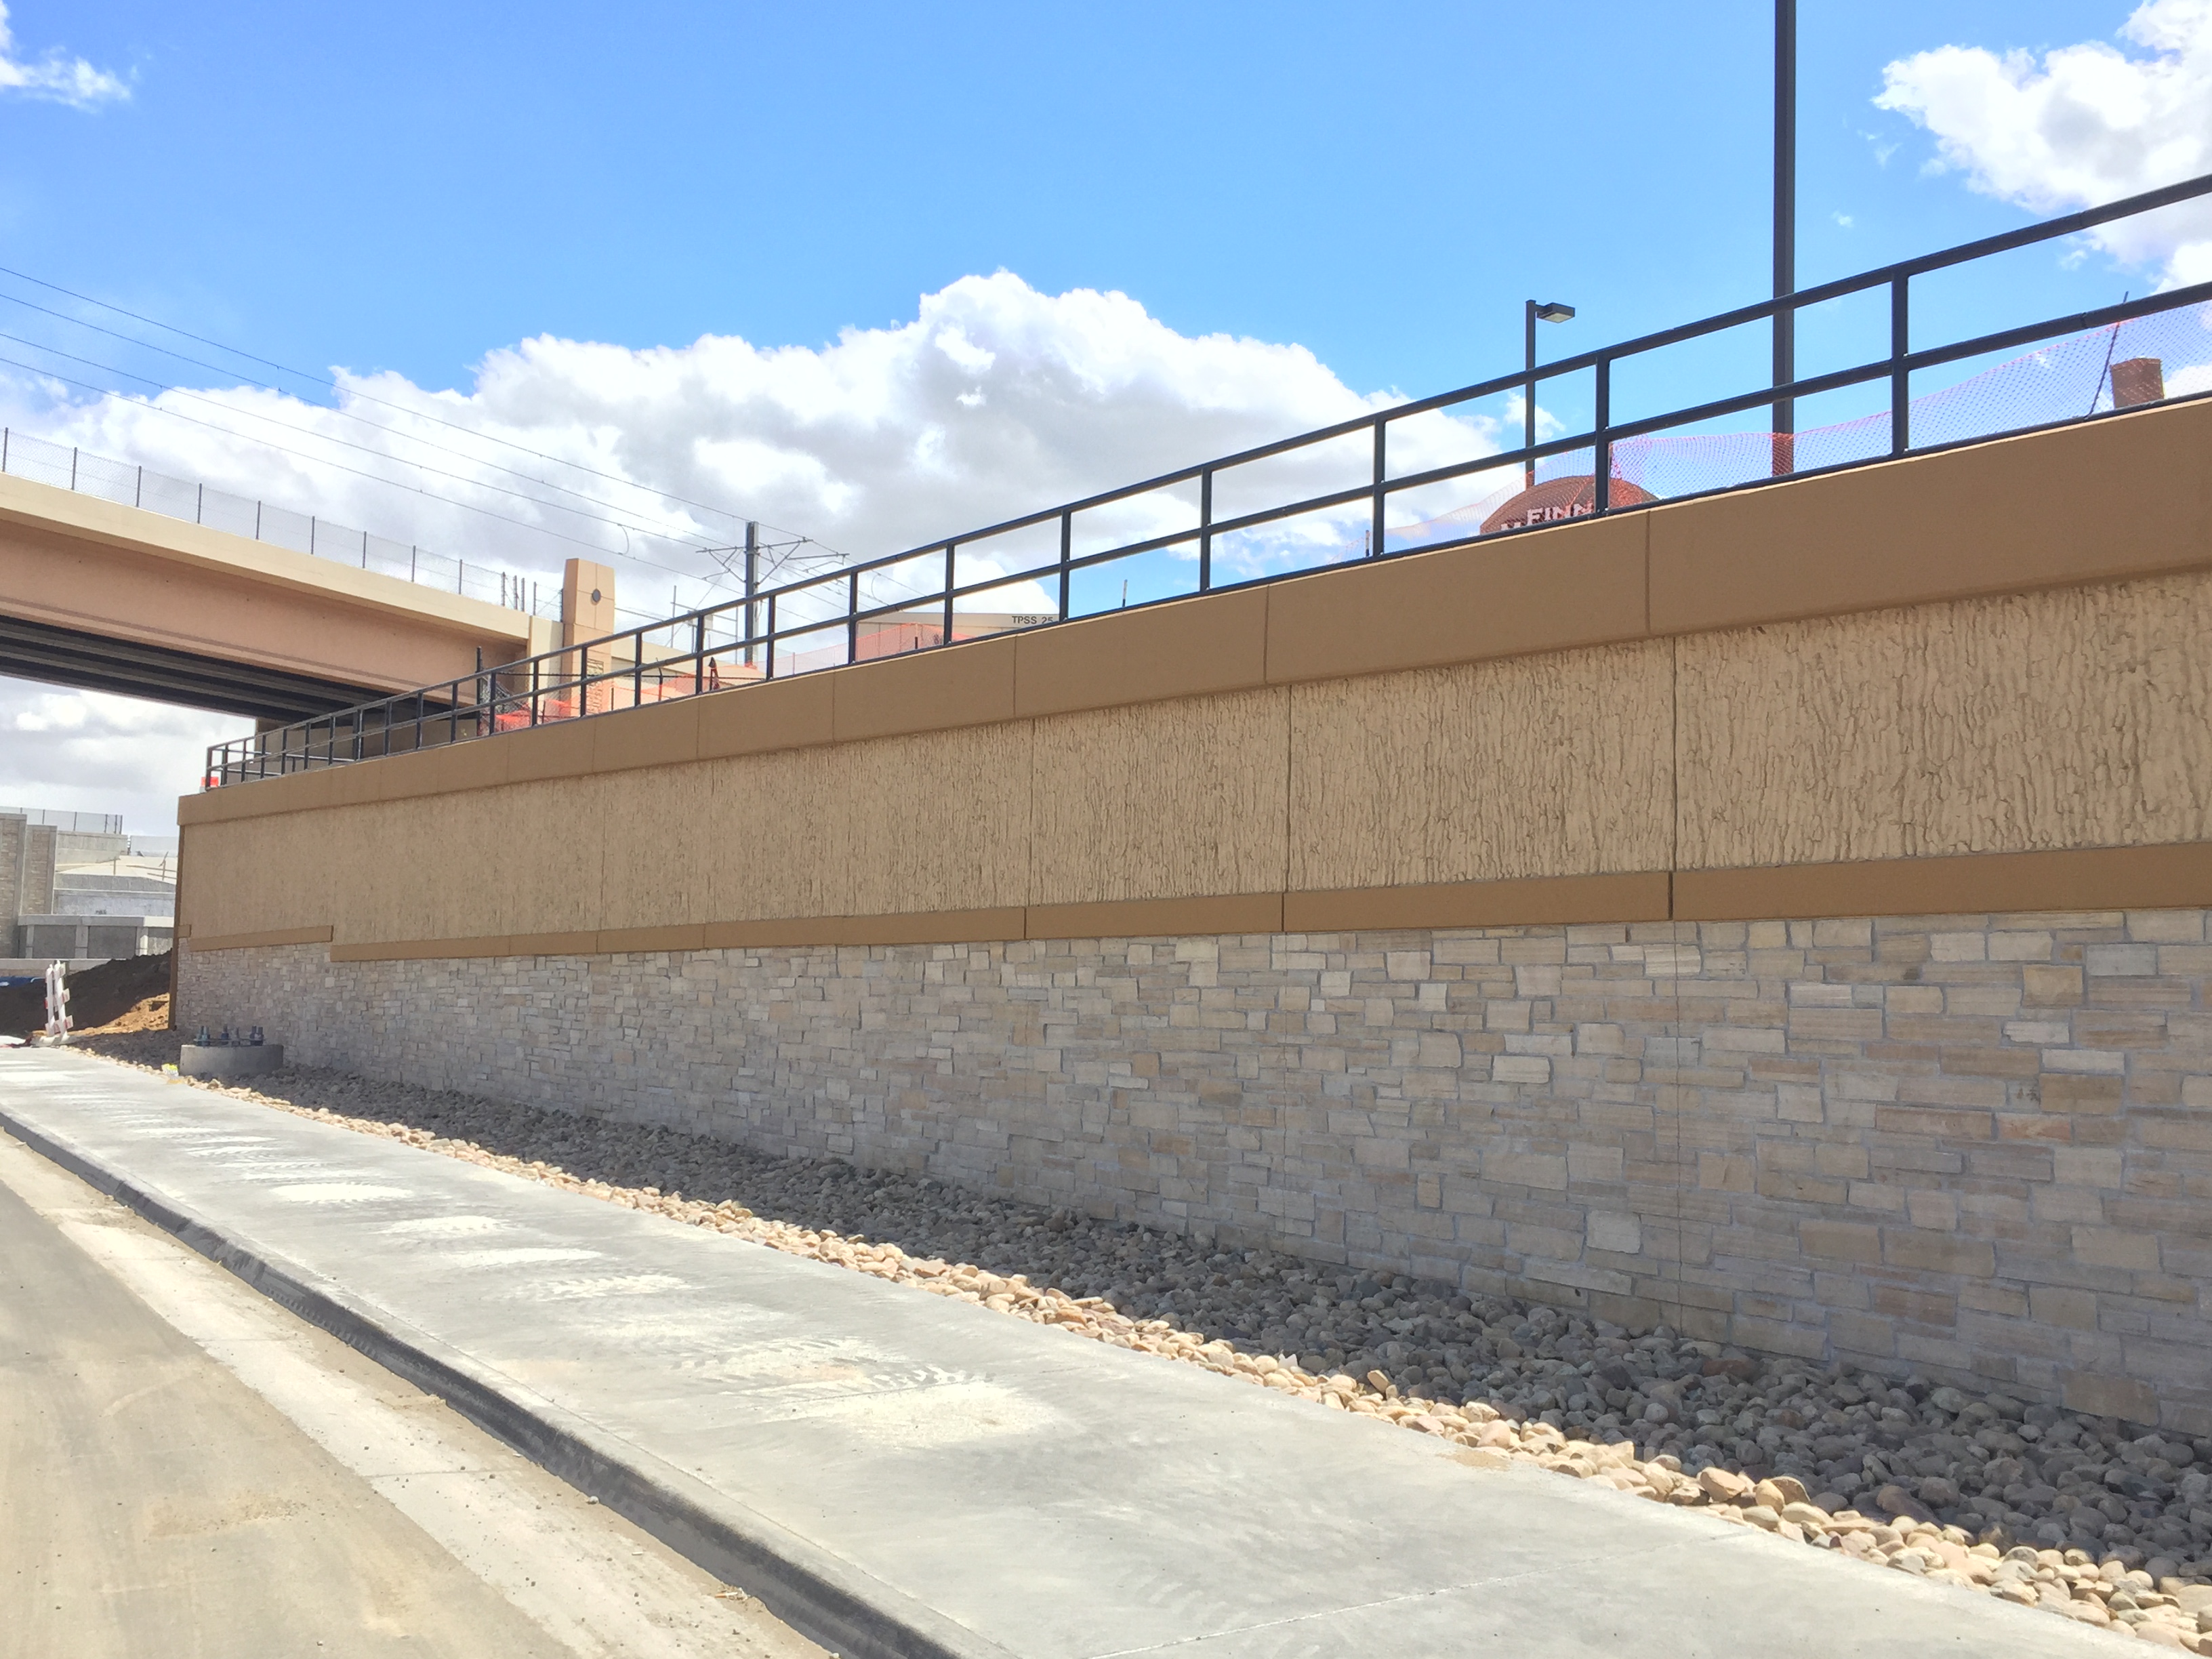 New wall south of Arapahoe Road - April 2017 detail image